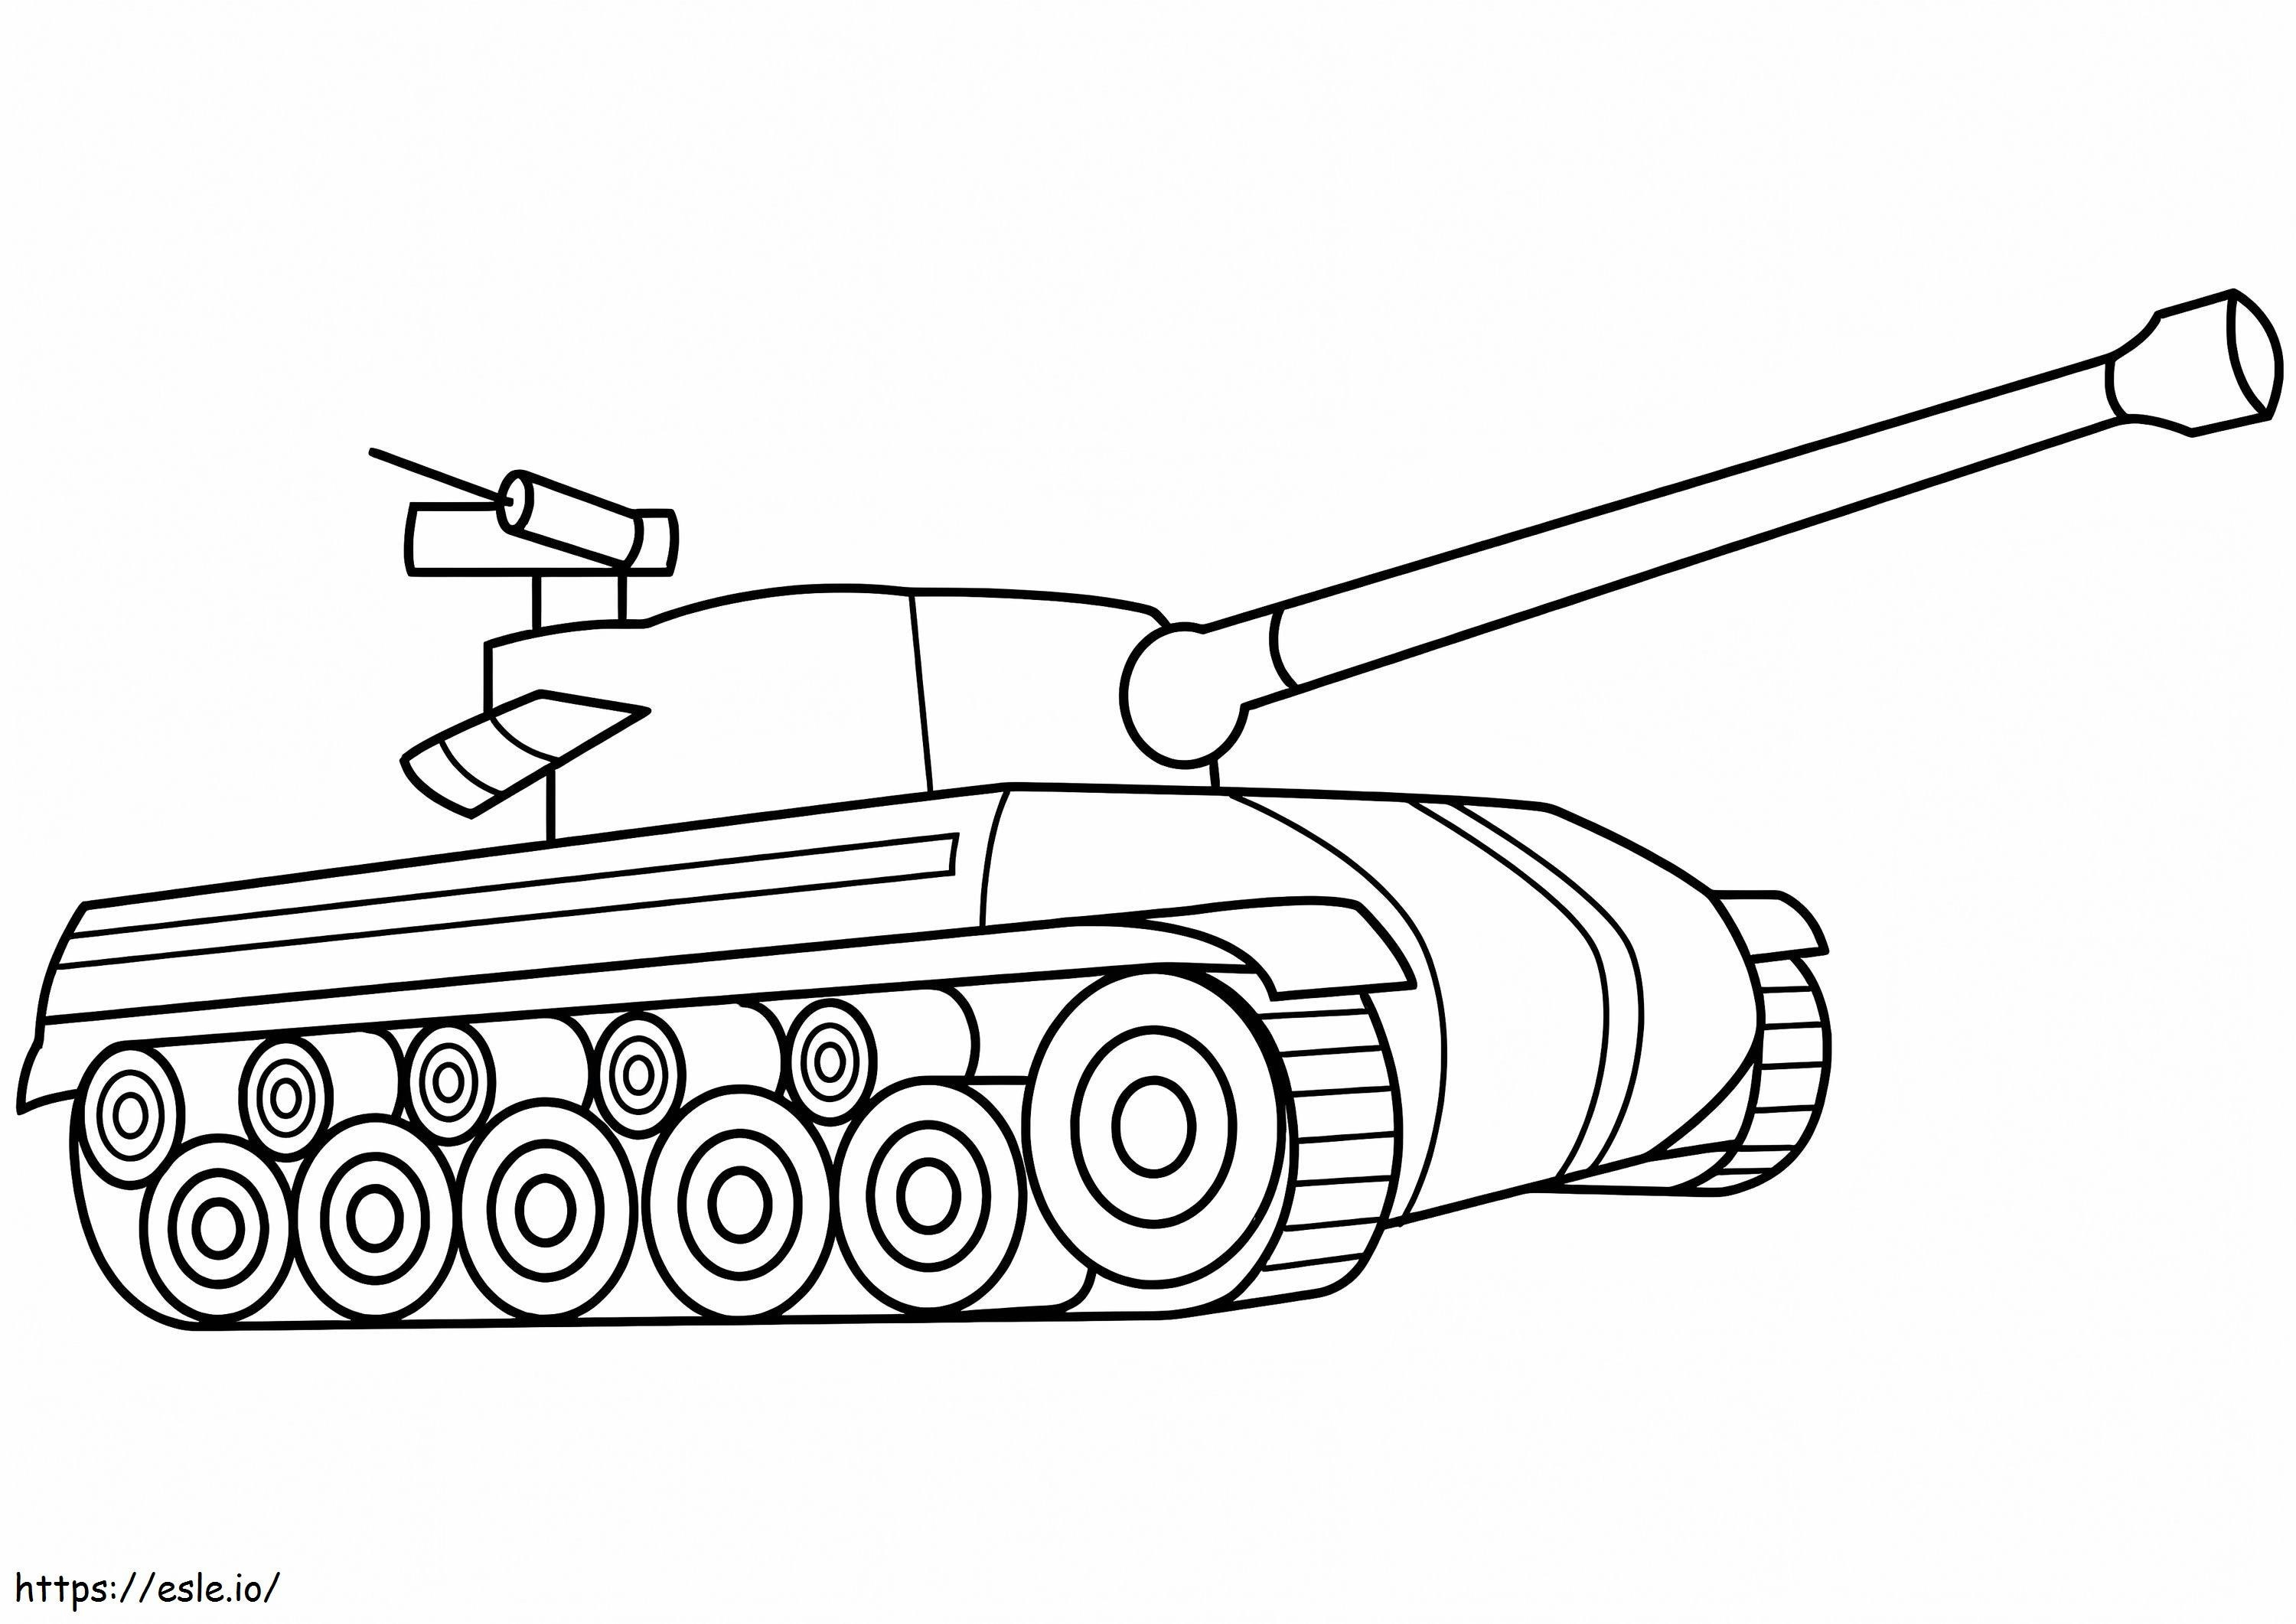 Military Tank 1 coloring page